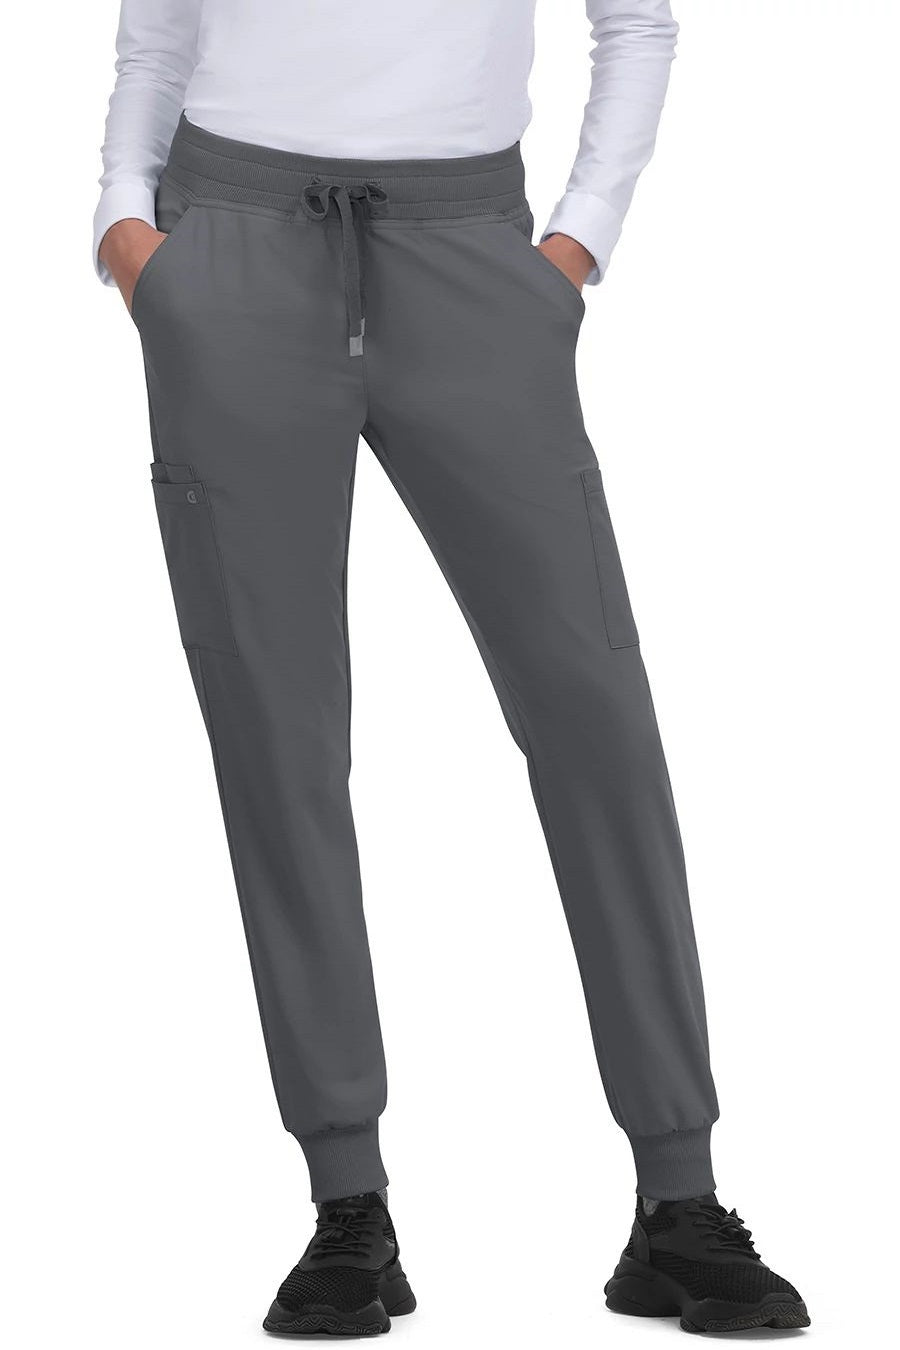 koi Scrub Pants Cureology Pulse Petite Jogger in Pewter at Parker's Clothing and Shoes.